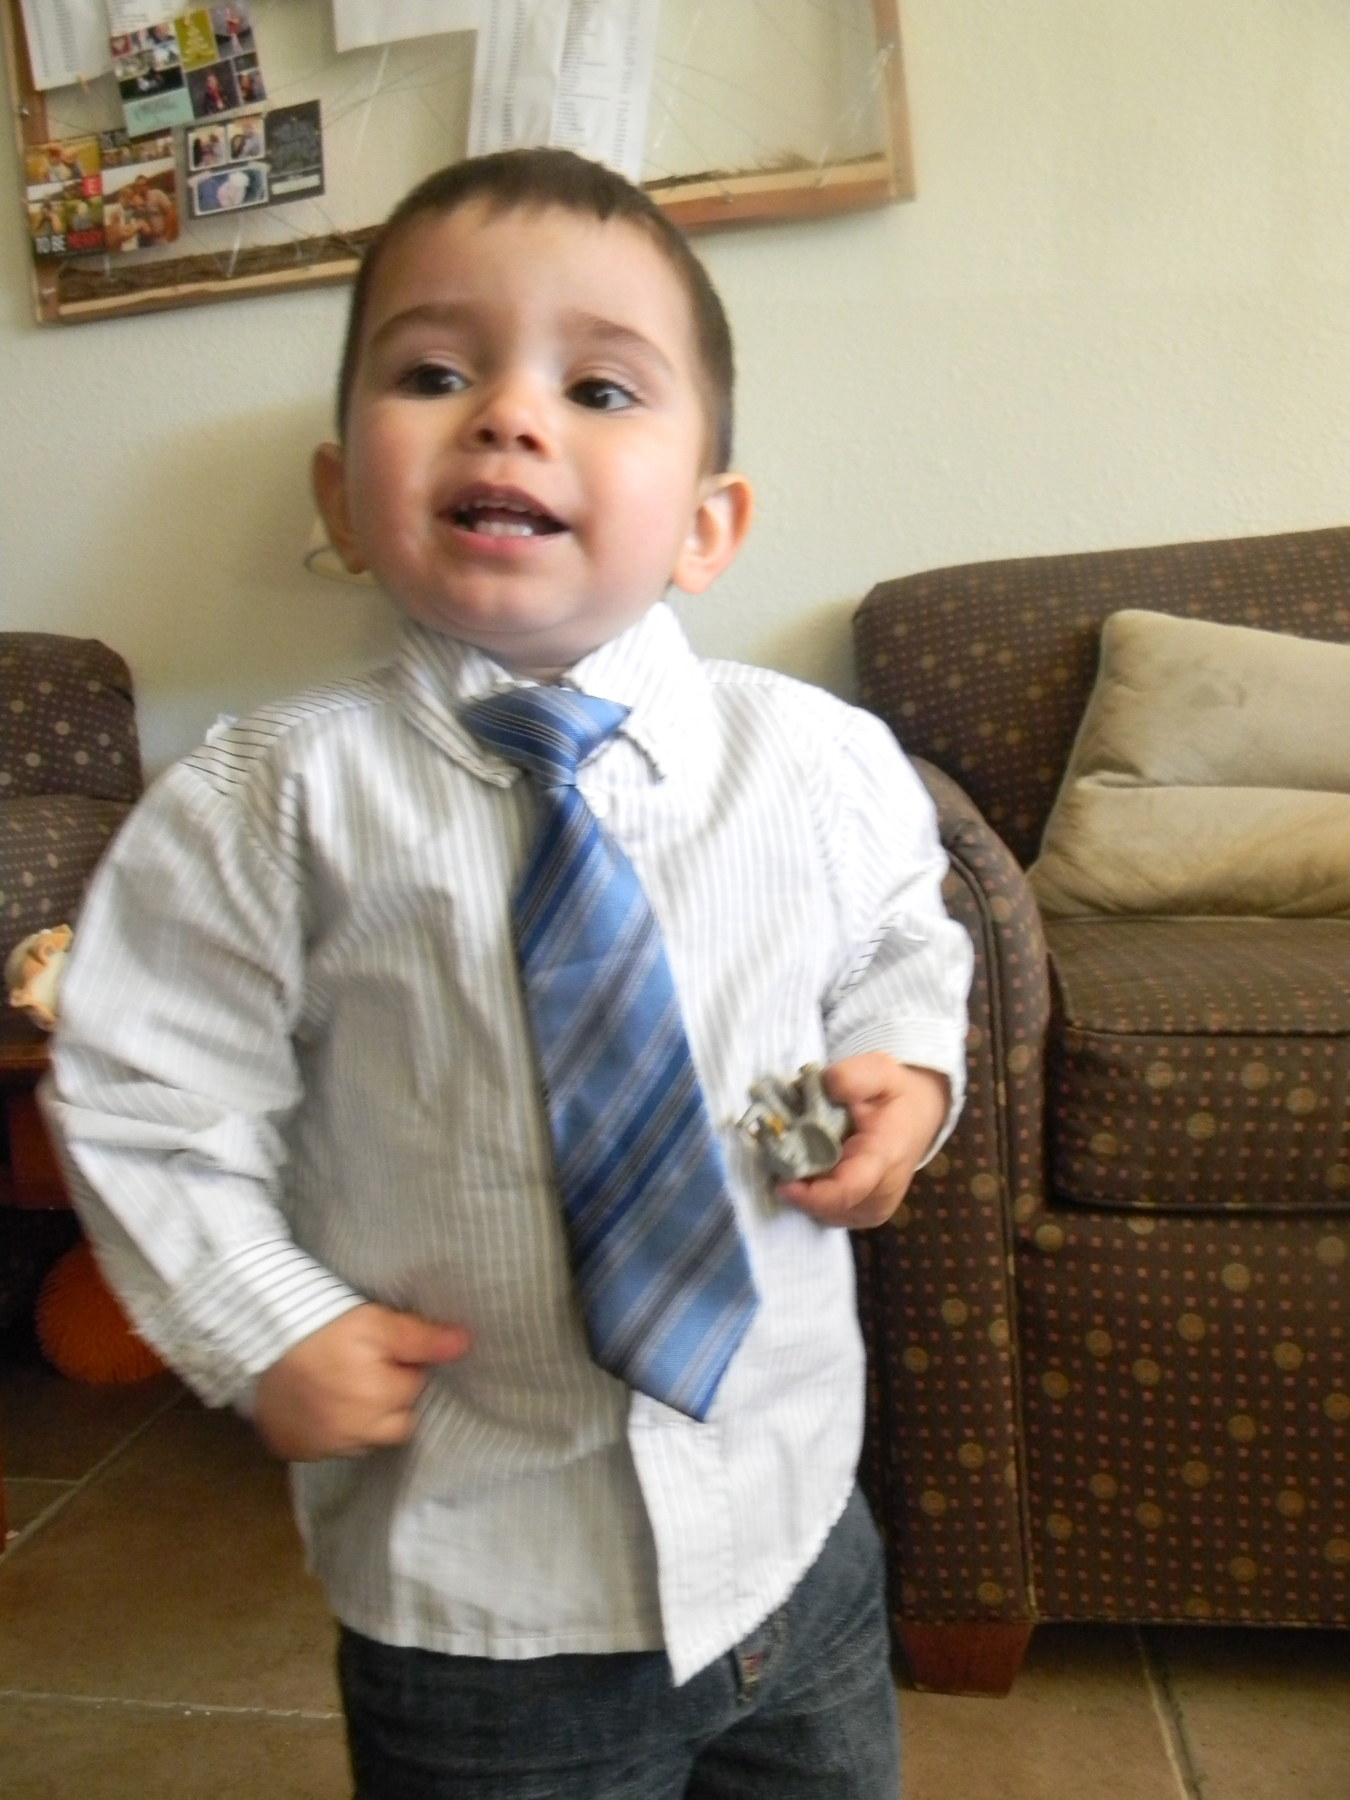 All dressed up for church